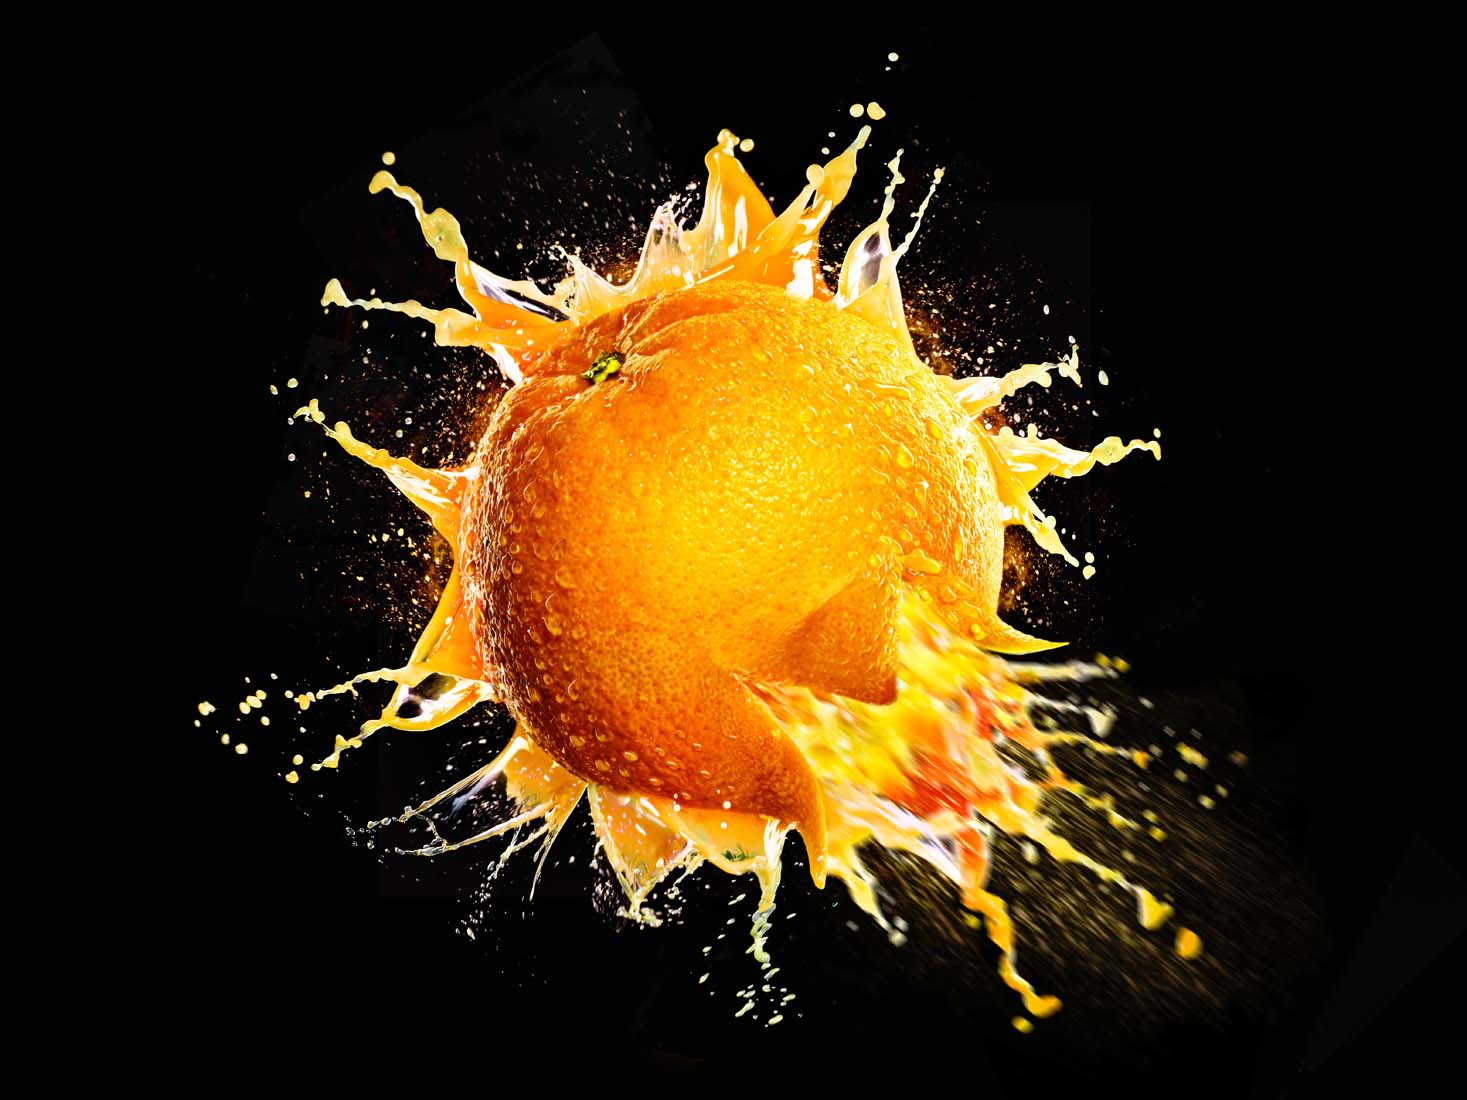 Exploding orange photo by Special Guest Barry Makariou